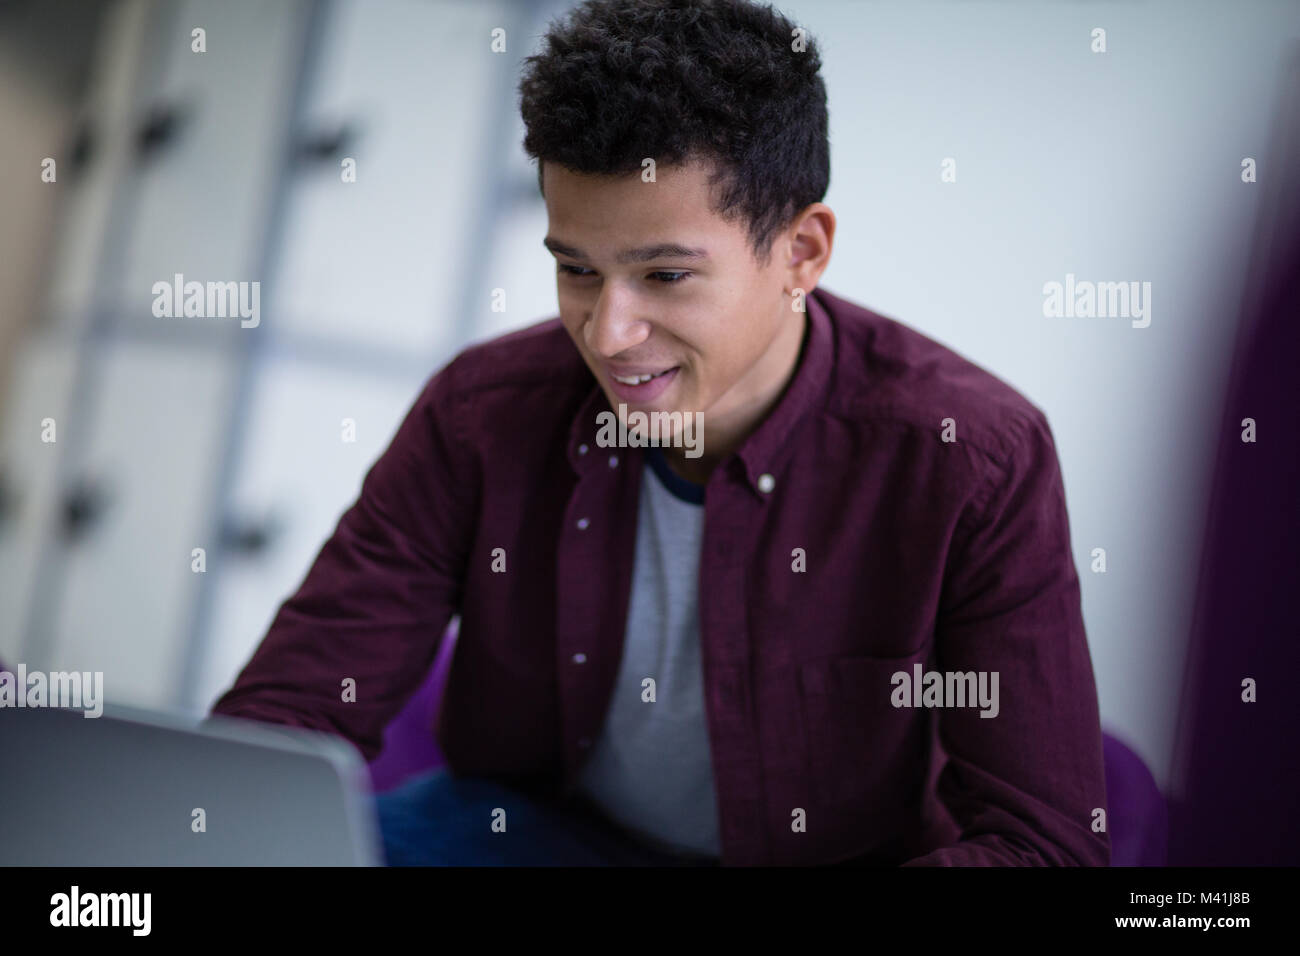 Student working on a laptop at college Stock Photo